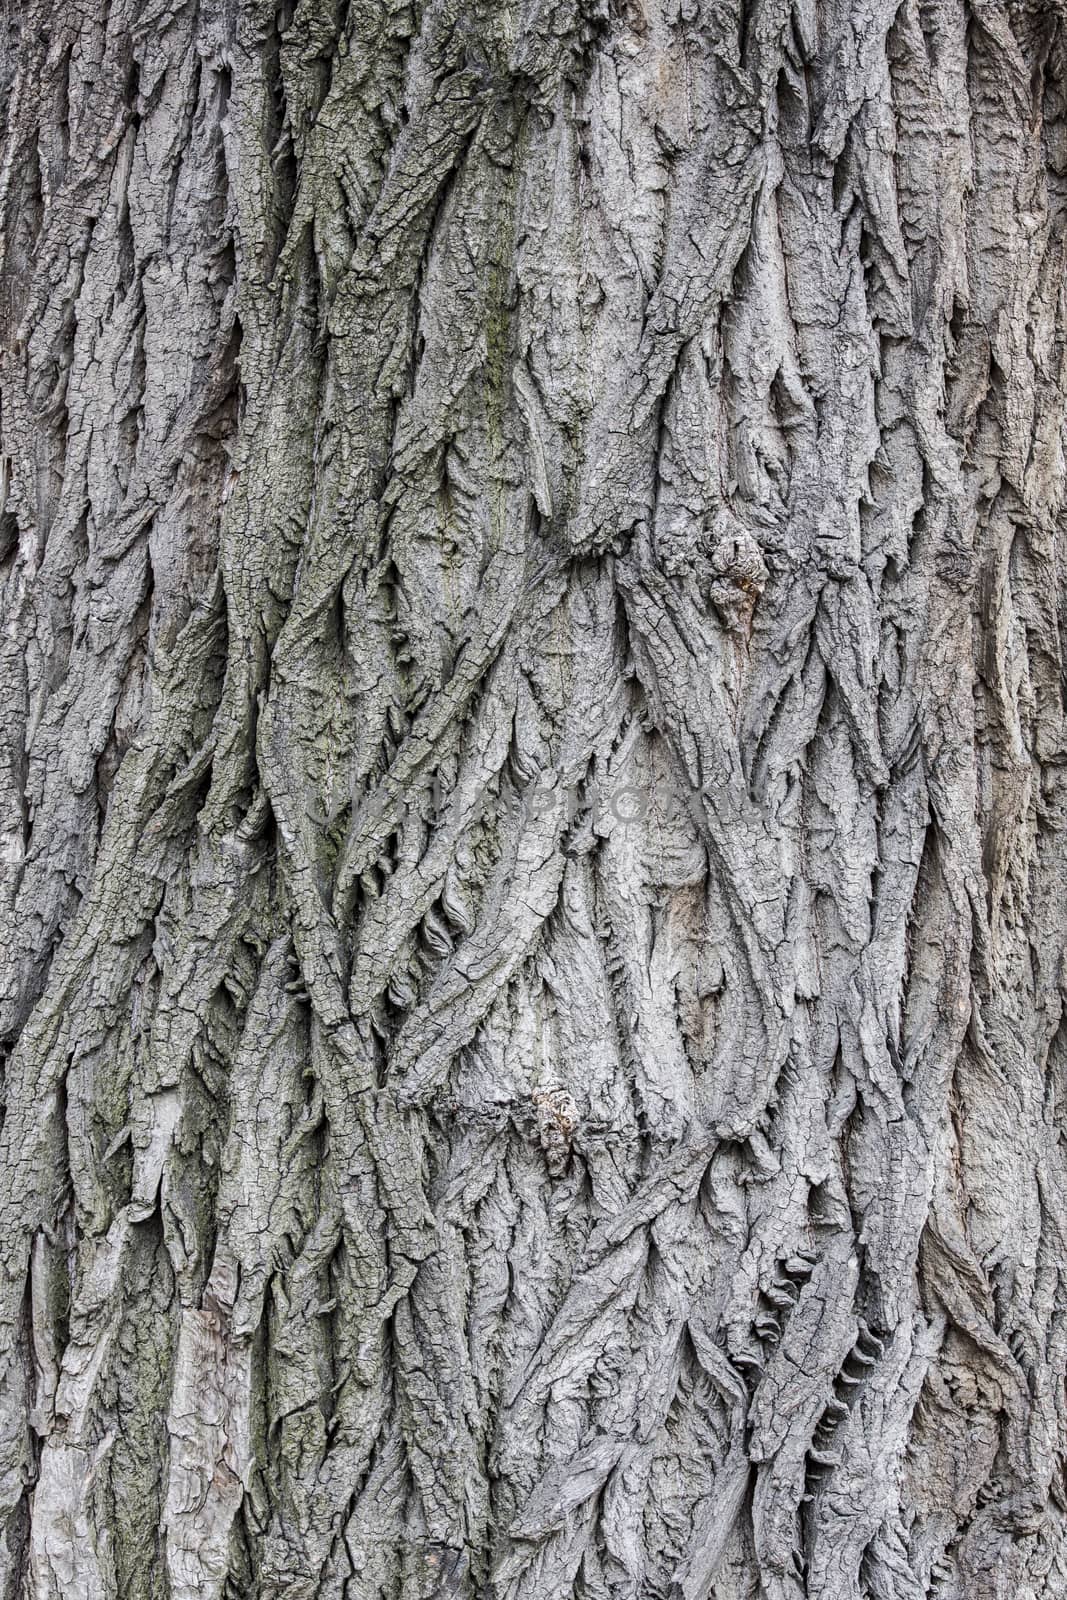 Populus bark texture, high resolution

 by A-dam